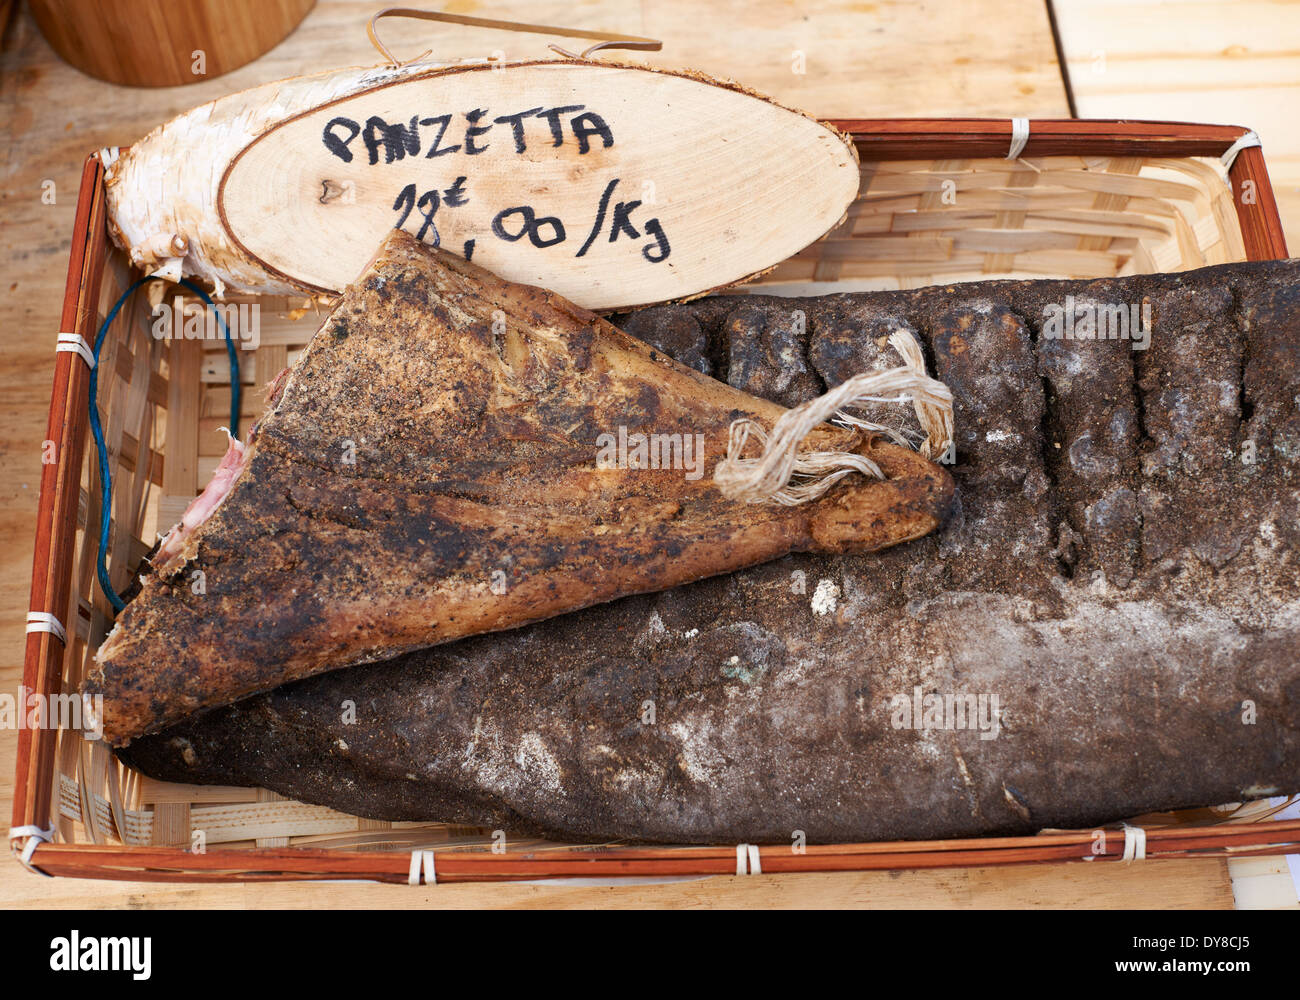 Gourmet sausage hand-made Panzetta meat on market of Aix en Provence, France Stock Photo